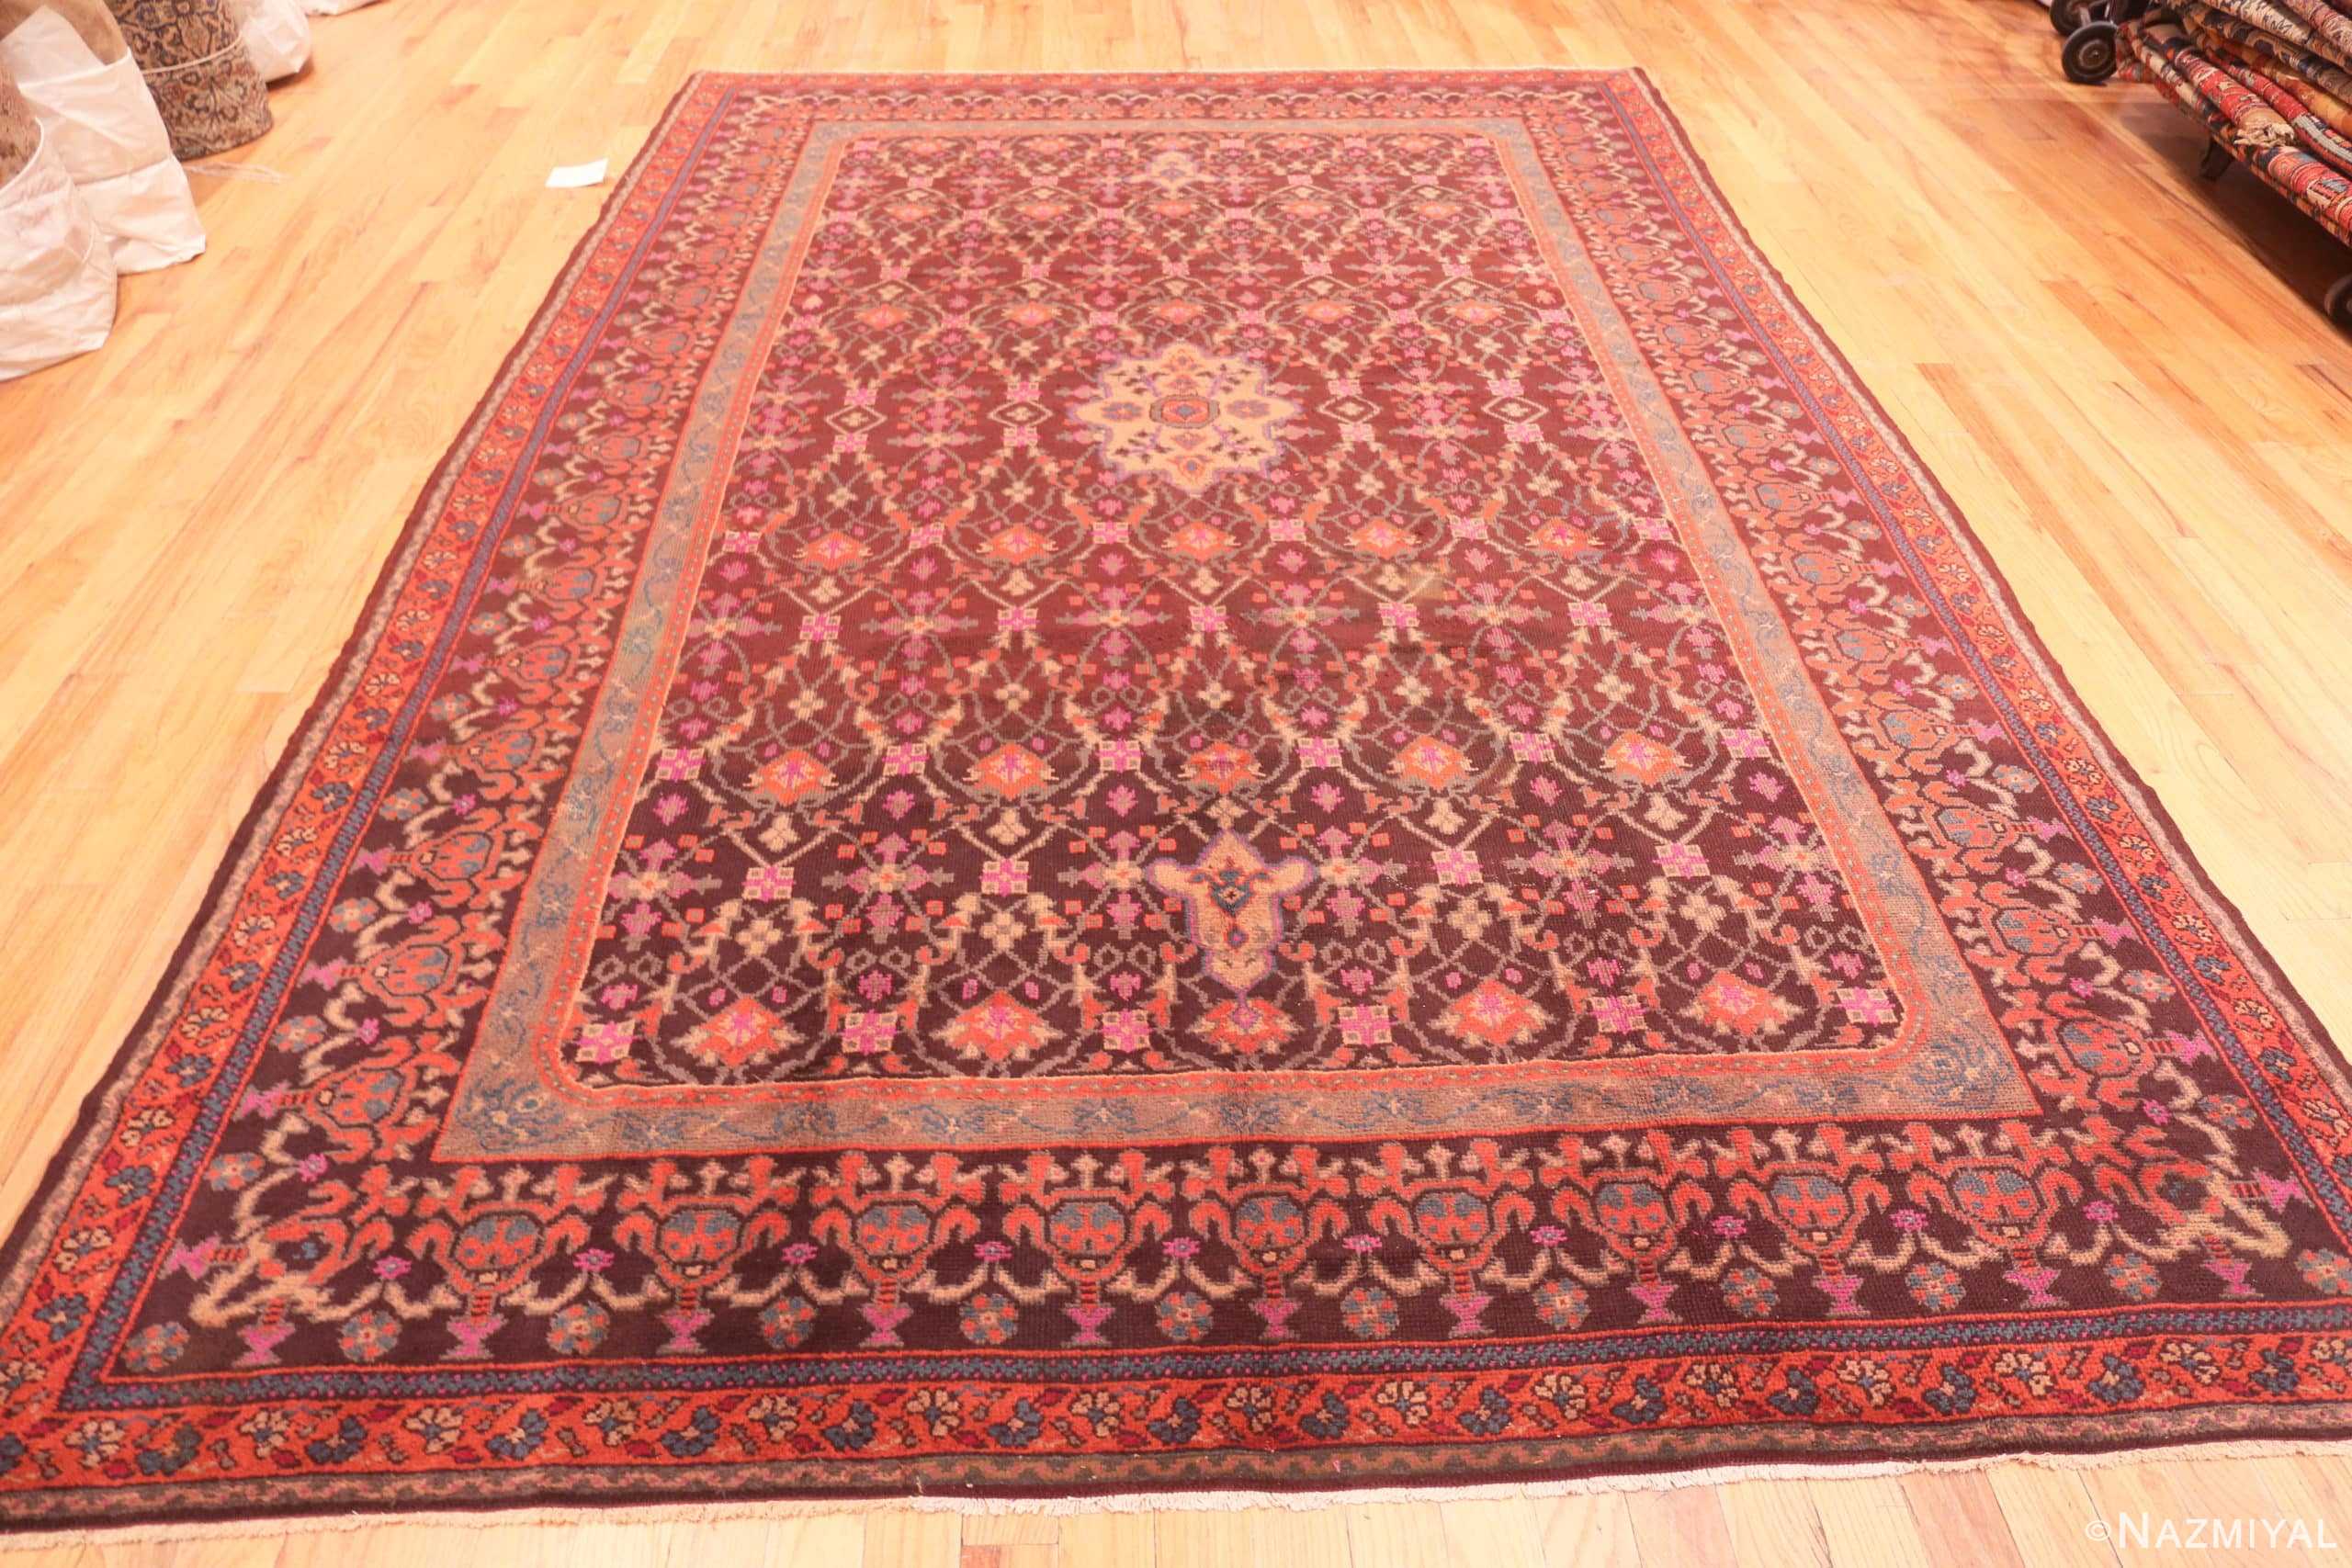 Whole View Of Purple Vintage German Continental Rug 70927 by Nazmiyal Antique Rugs